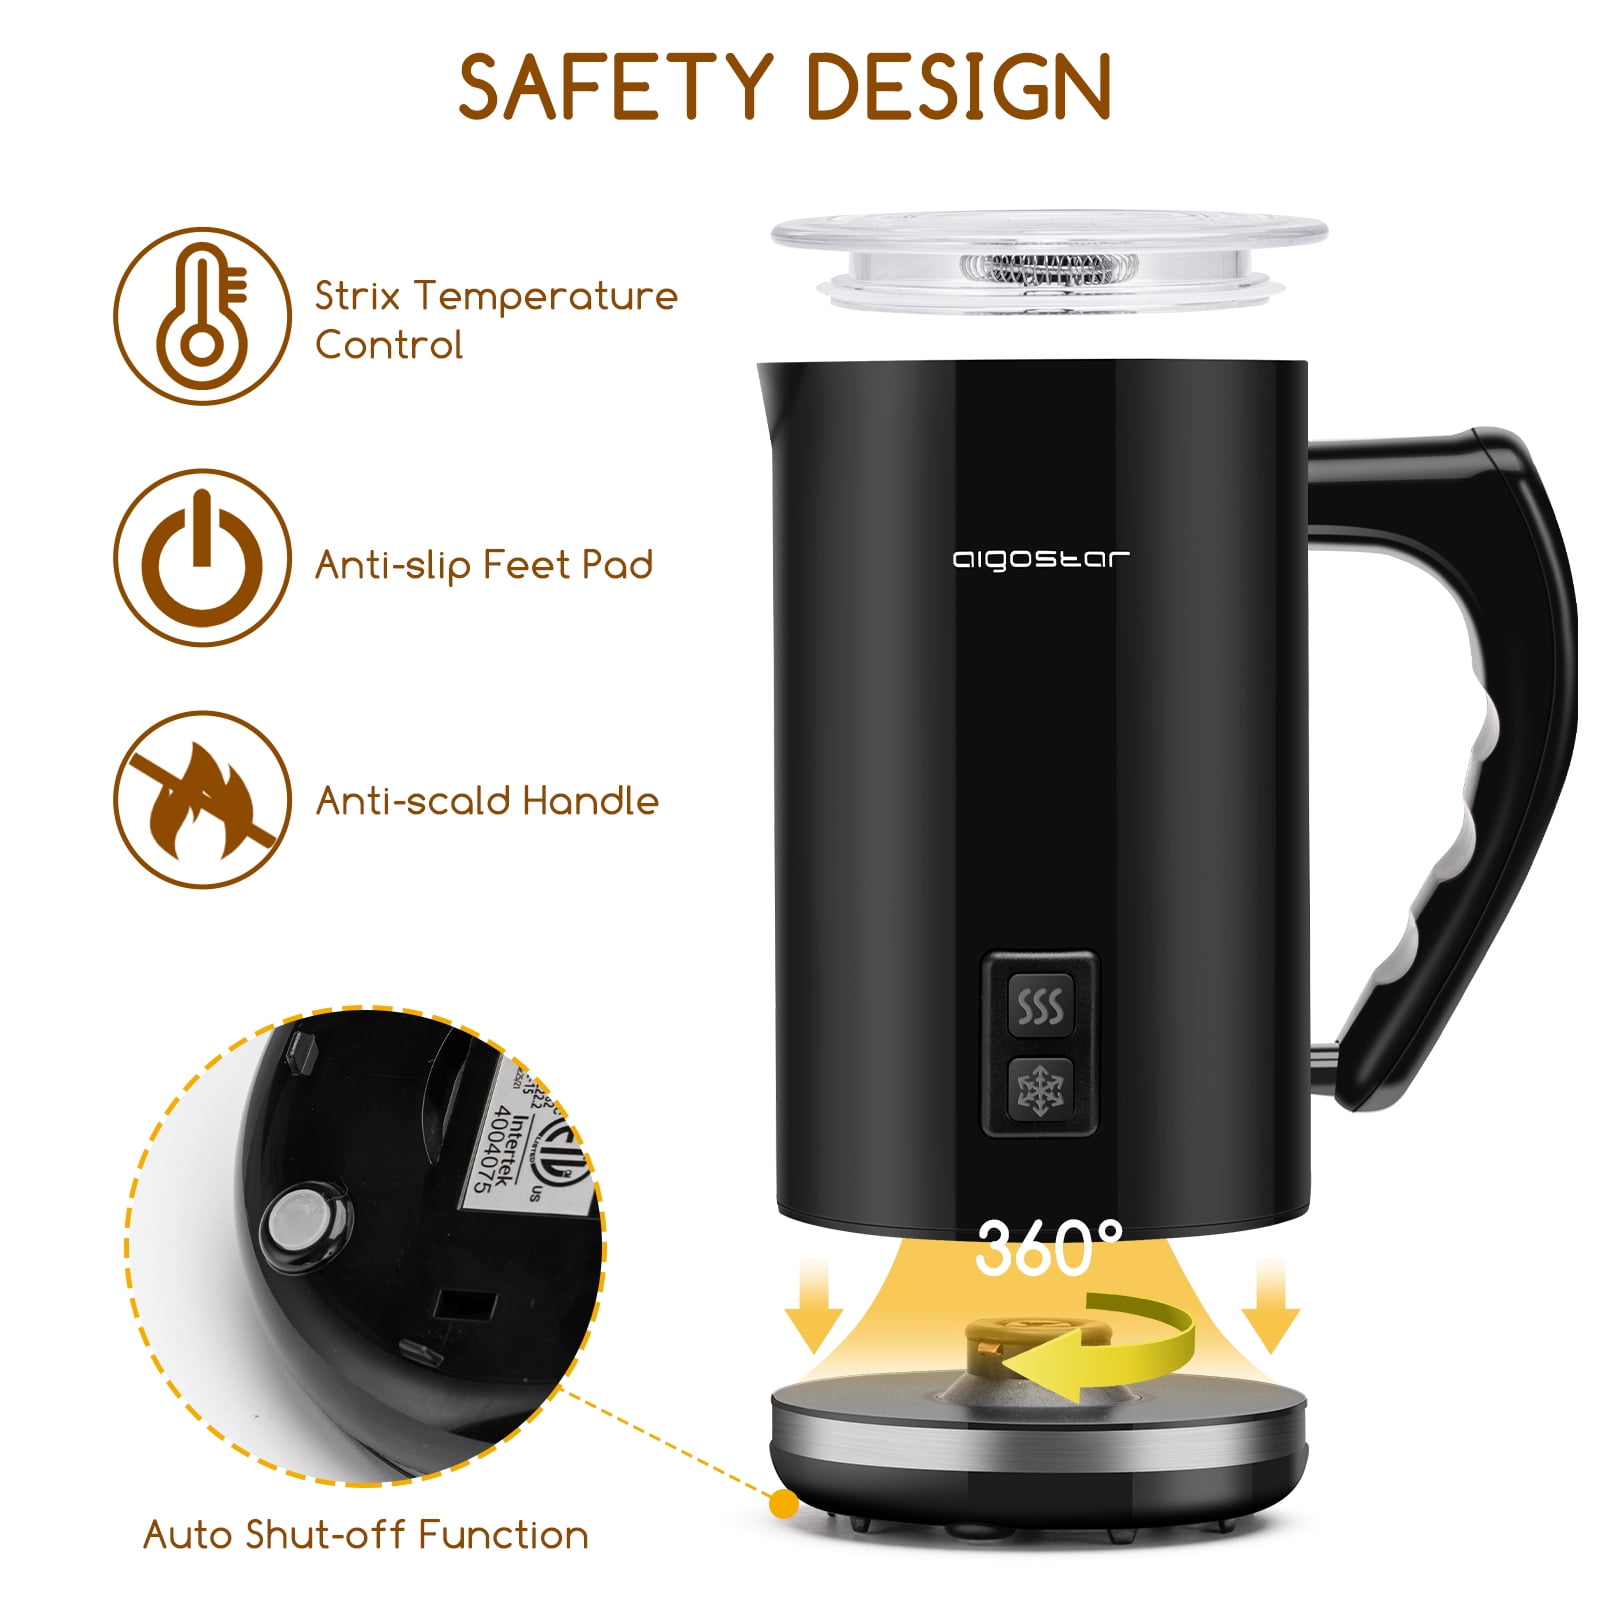 Automatic Electric Milk Frother and Steamer Hot and Cold , 4-in-1 Milk  Steamer Hot and Cold Milk Foam Maker for Coffee, Latte, Cappuccino, Hot  Chocolate, 8.1 oz Heater with Strix Control 